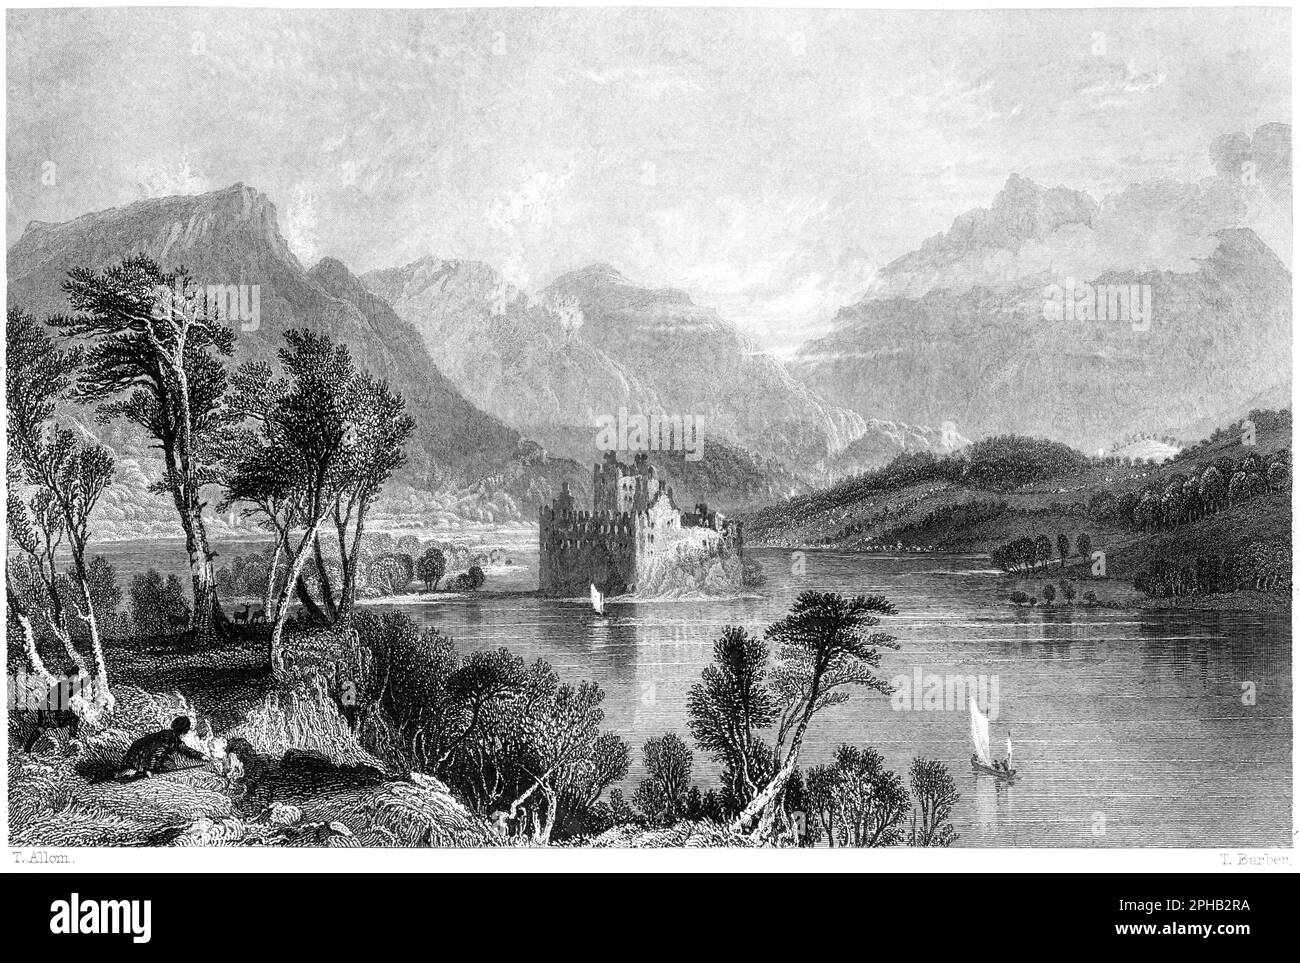 An engraving of Kilchurn Castle, Loch Awe looking towards Dalmally, Argyleshire, Scotland UK scanned at high resolution from a book printed in 1840. Stock Photo